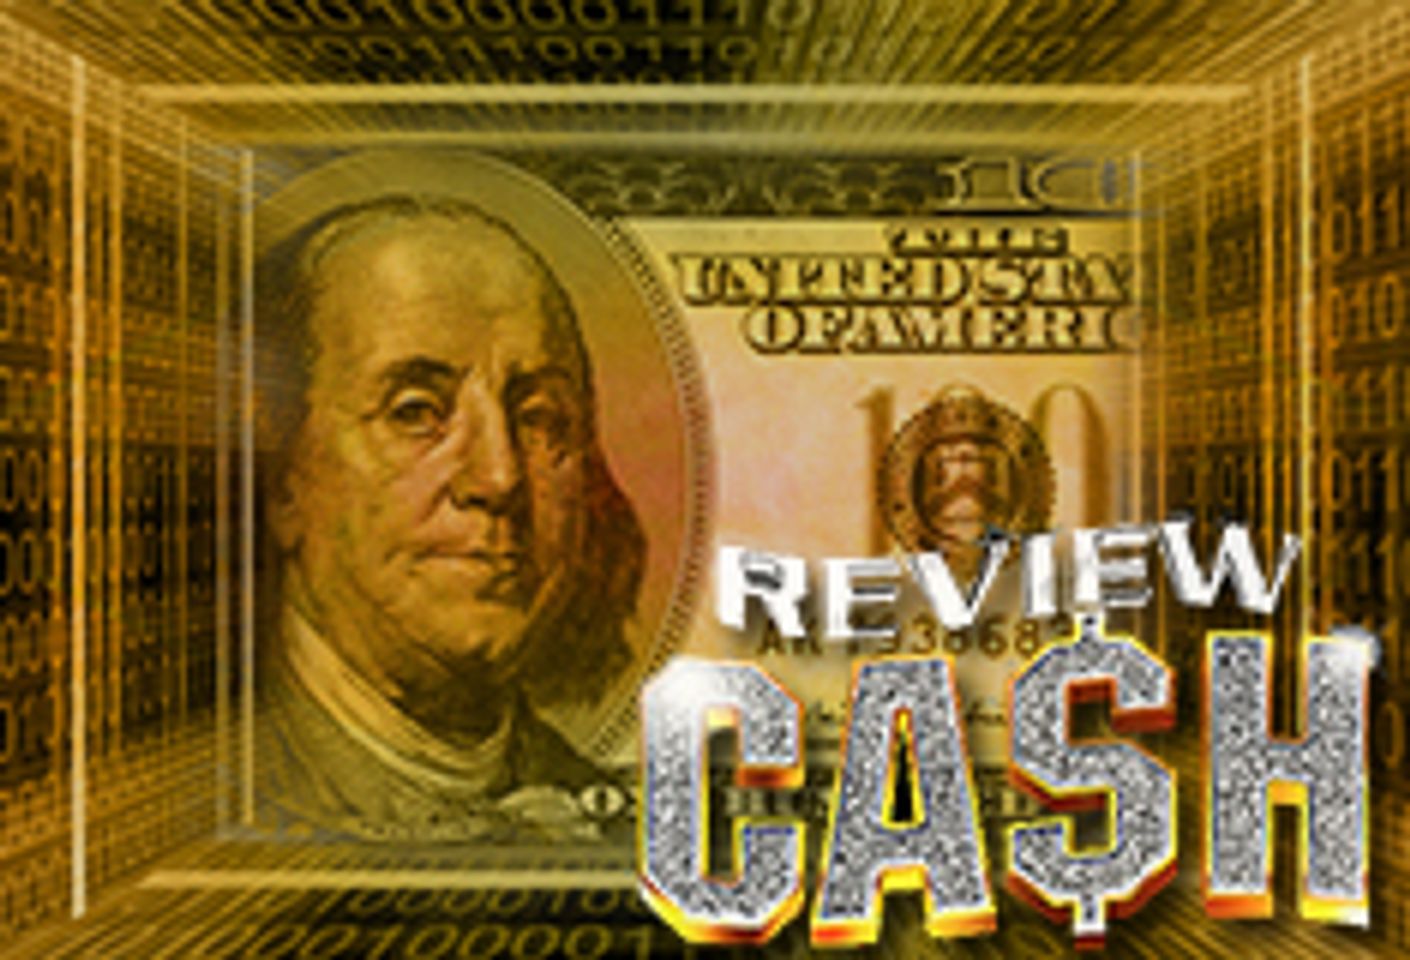 ReviewCash Offers Sticky Upsell Content